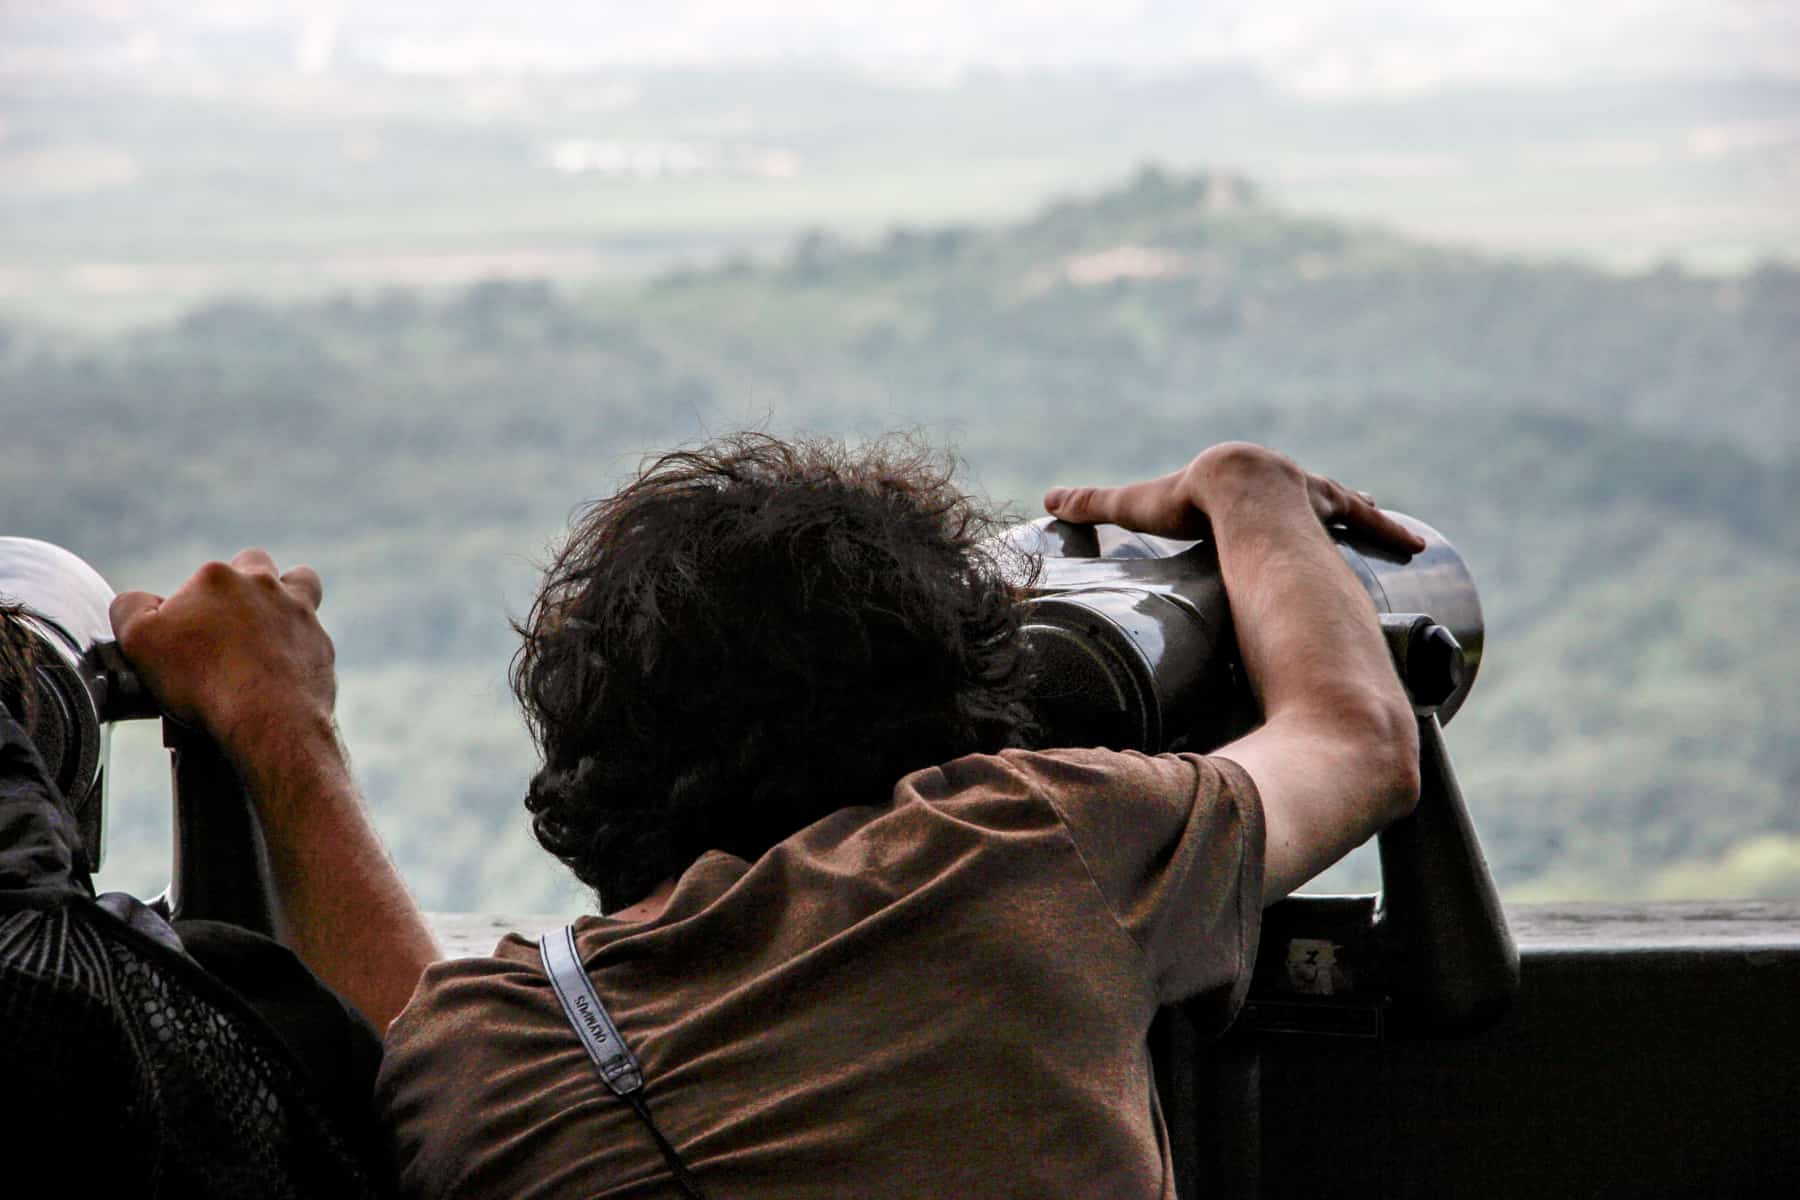 A woman in a brown t-shirt looks through a huge set of binoculars towards a green mound - the Propaganda Village in North Korea, seen on a trip to the DMZ.